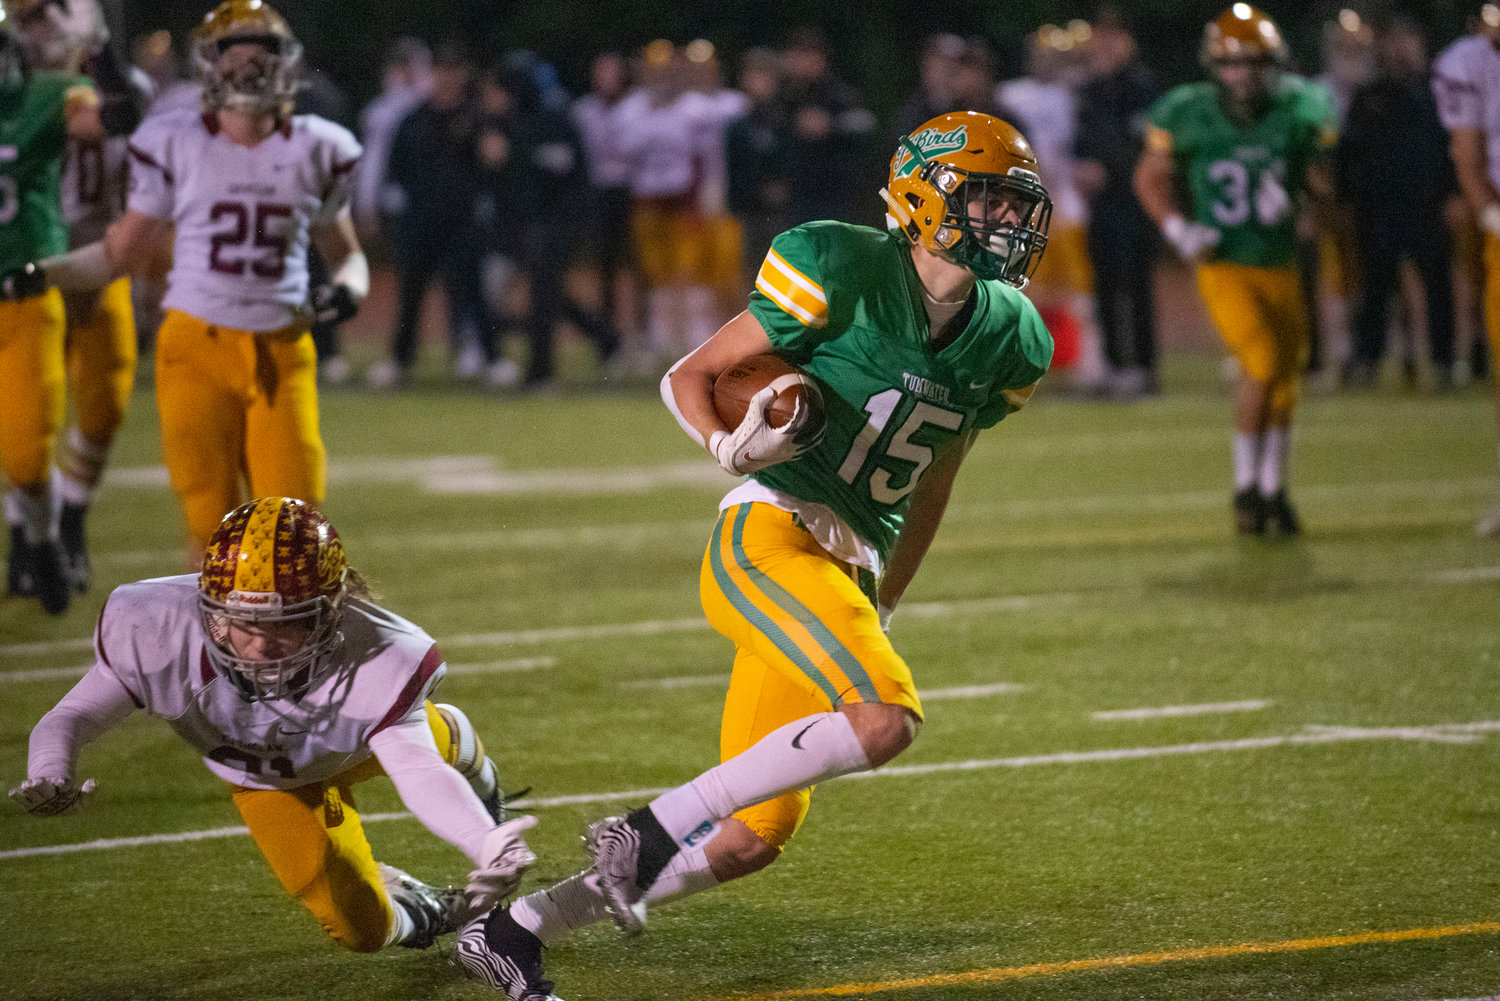 Tumwater’s Ashton Paine (15) crosses the goal line for a rushing touchdown against Enumclaw in the 2A state quarterfinals Nov. 19.